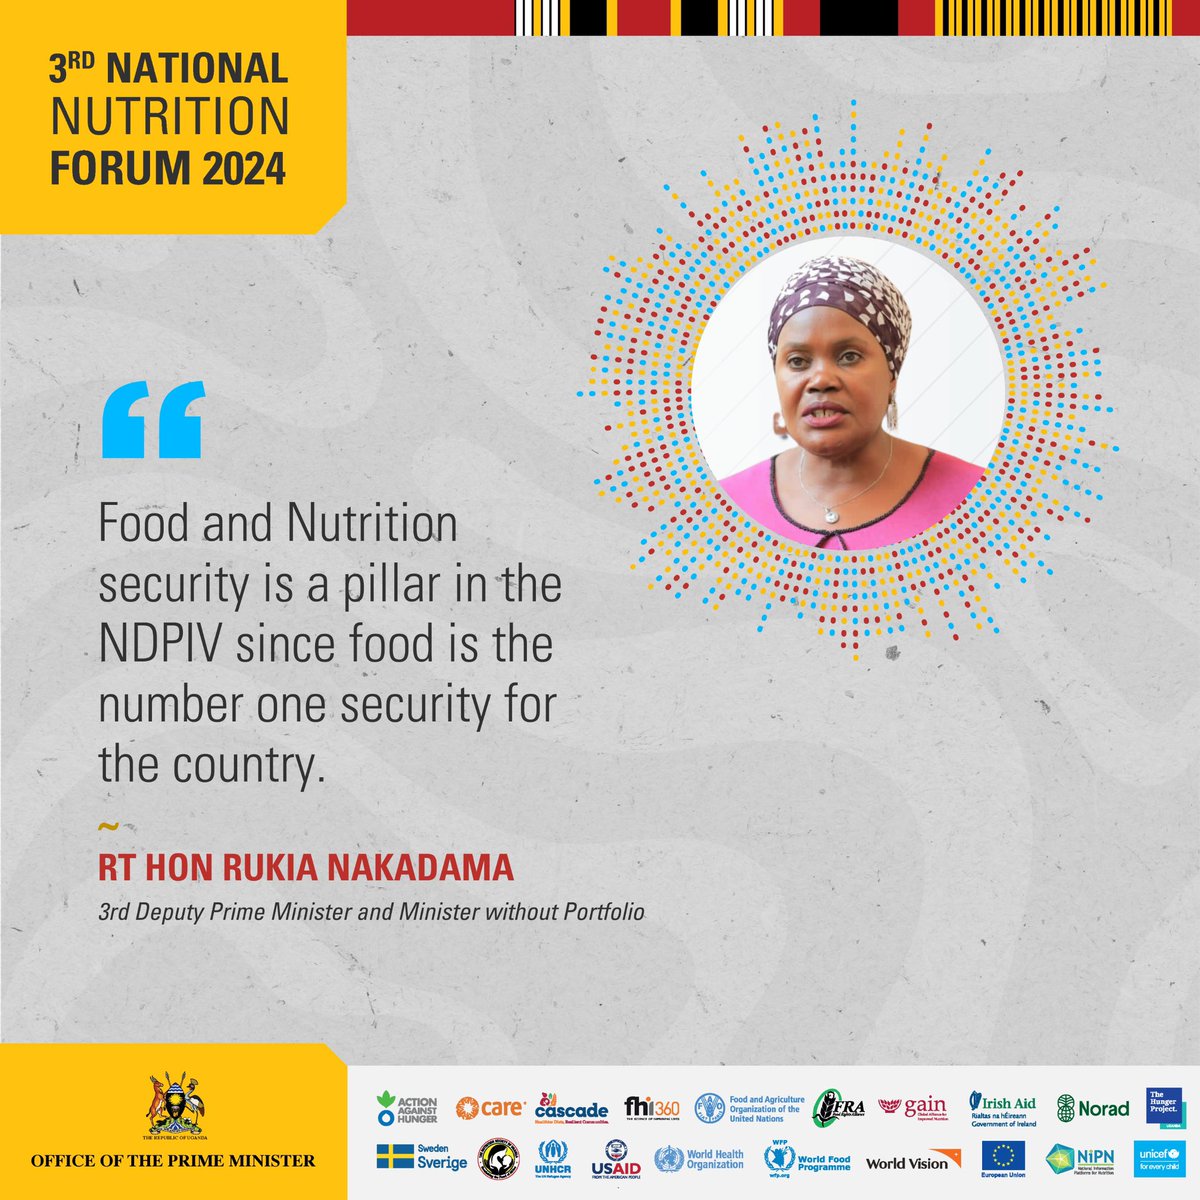 Food and Nutrition security is a pillar in the NDPV since food is the number one security for the country. Rt. Hon. @Rukianakadama #NationalNutritionForum2024